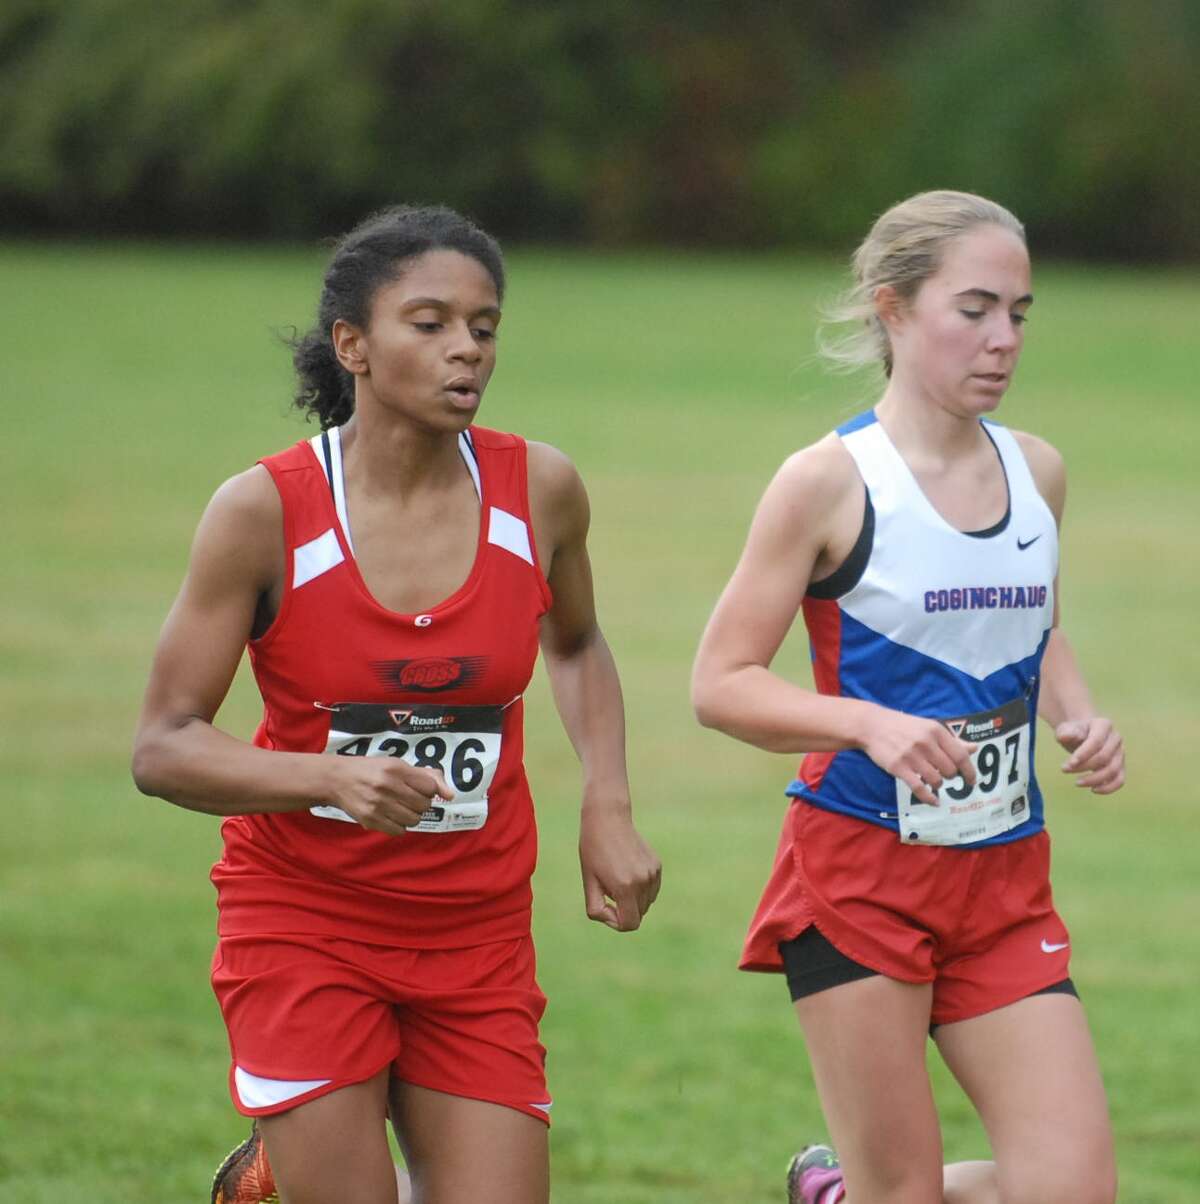 Danae Rivers of Wilbur Cross runs next to Samantha Drop of Coginchaug during Saturday’s seeded varsity girls’ race at Wickham Park in Manchester. Photo by Mary Albl